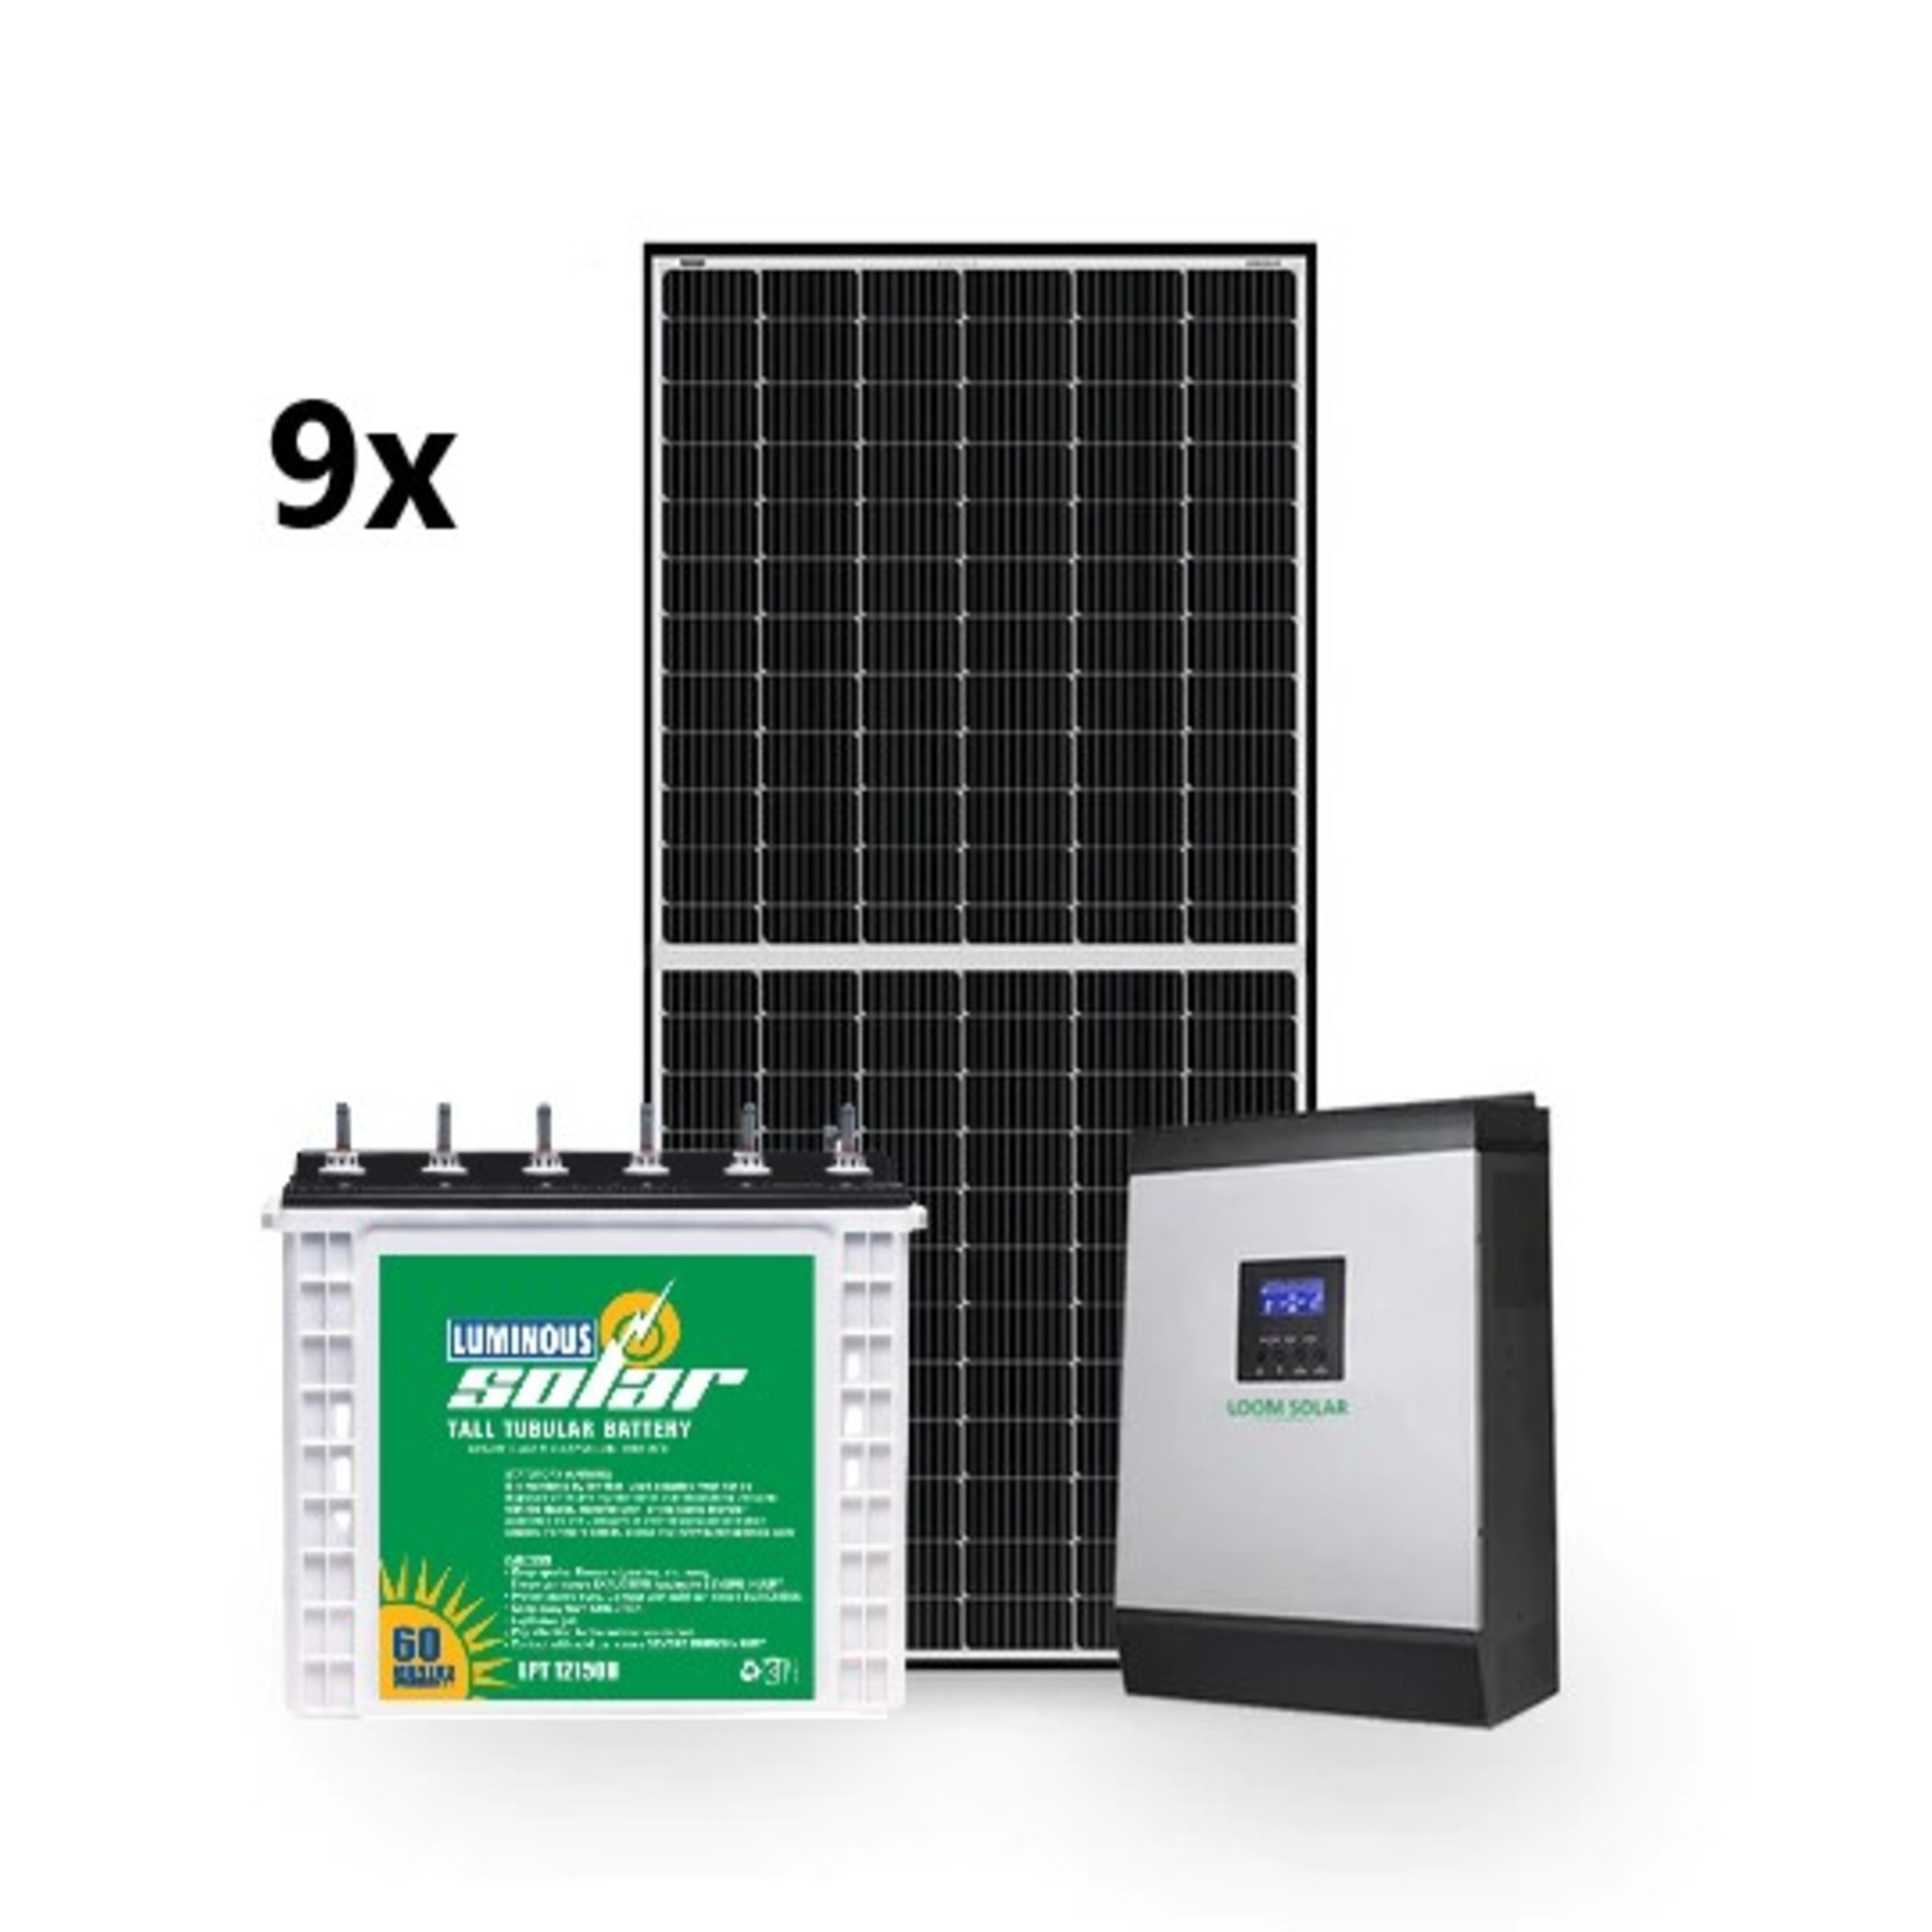 5kW off grid solar system with Lithium Battery for Homes